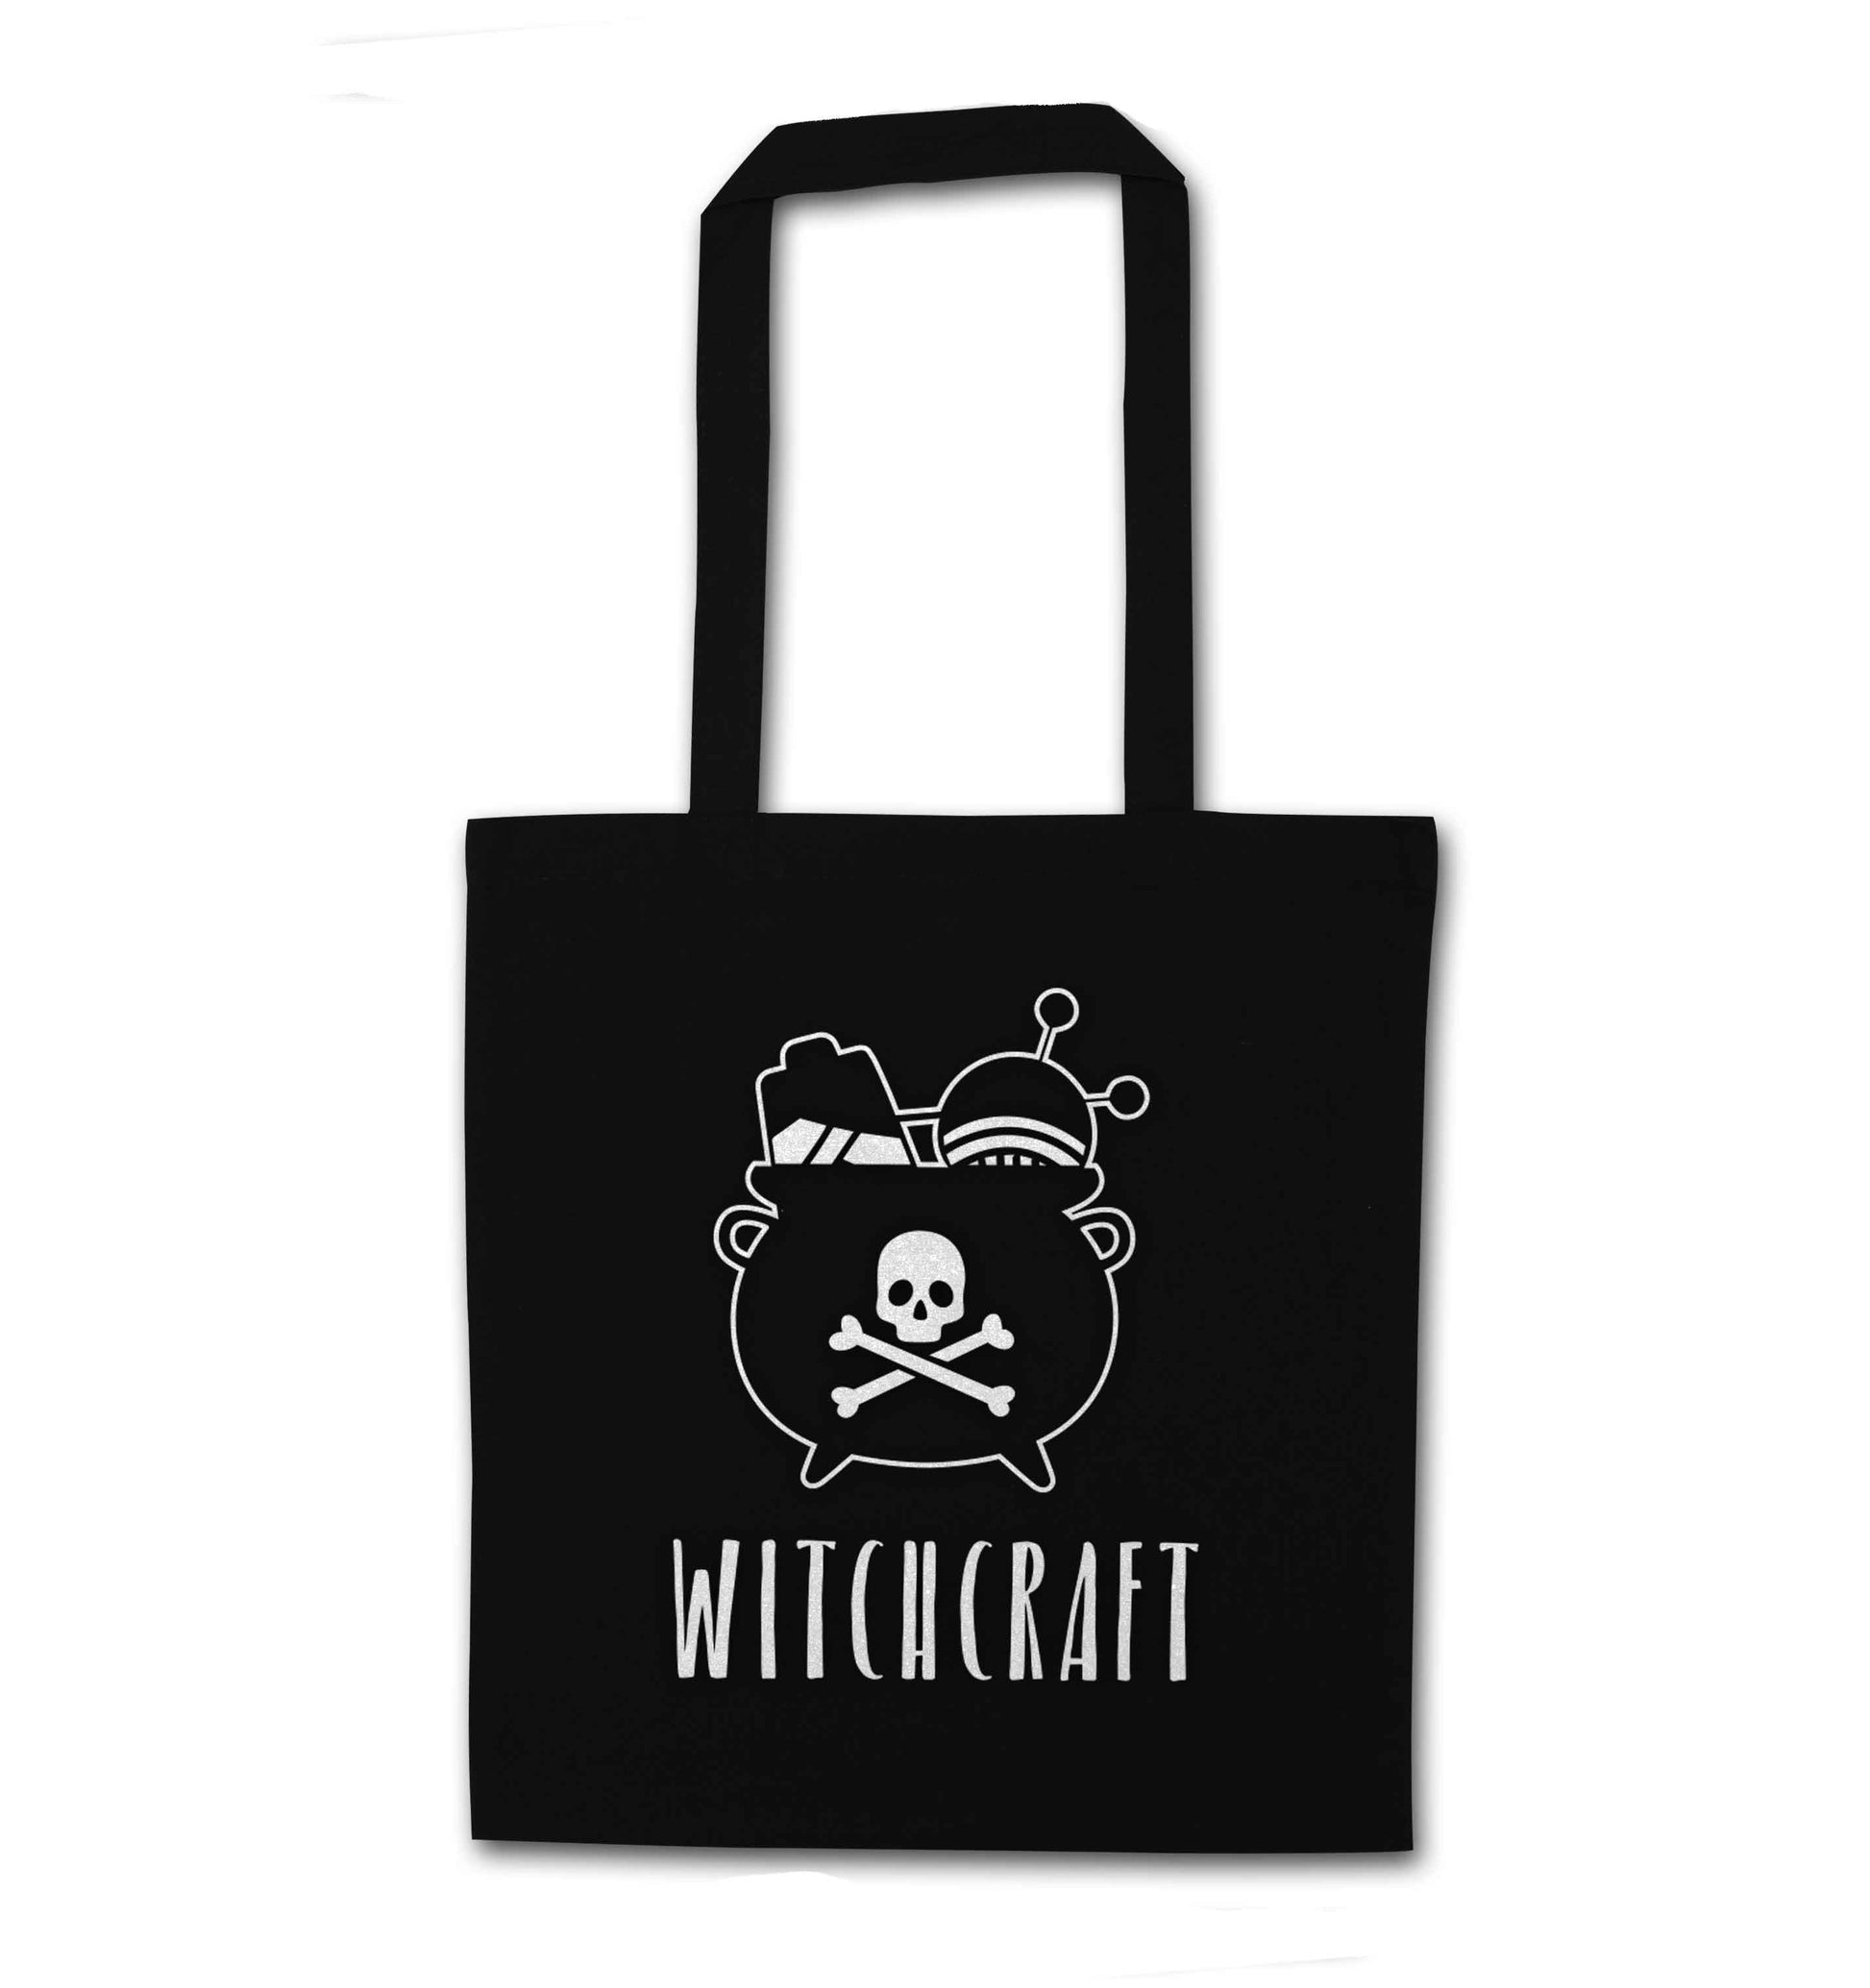 Witchcraft black tote bag